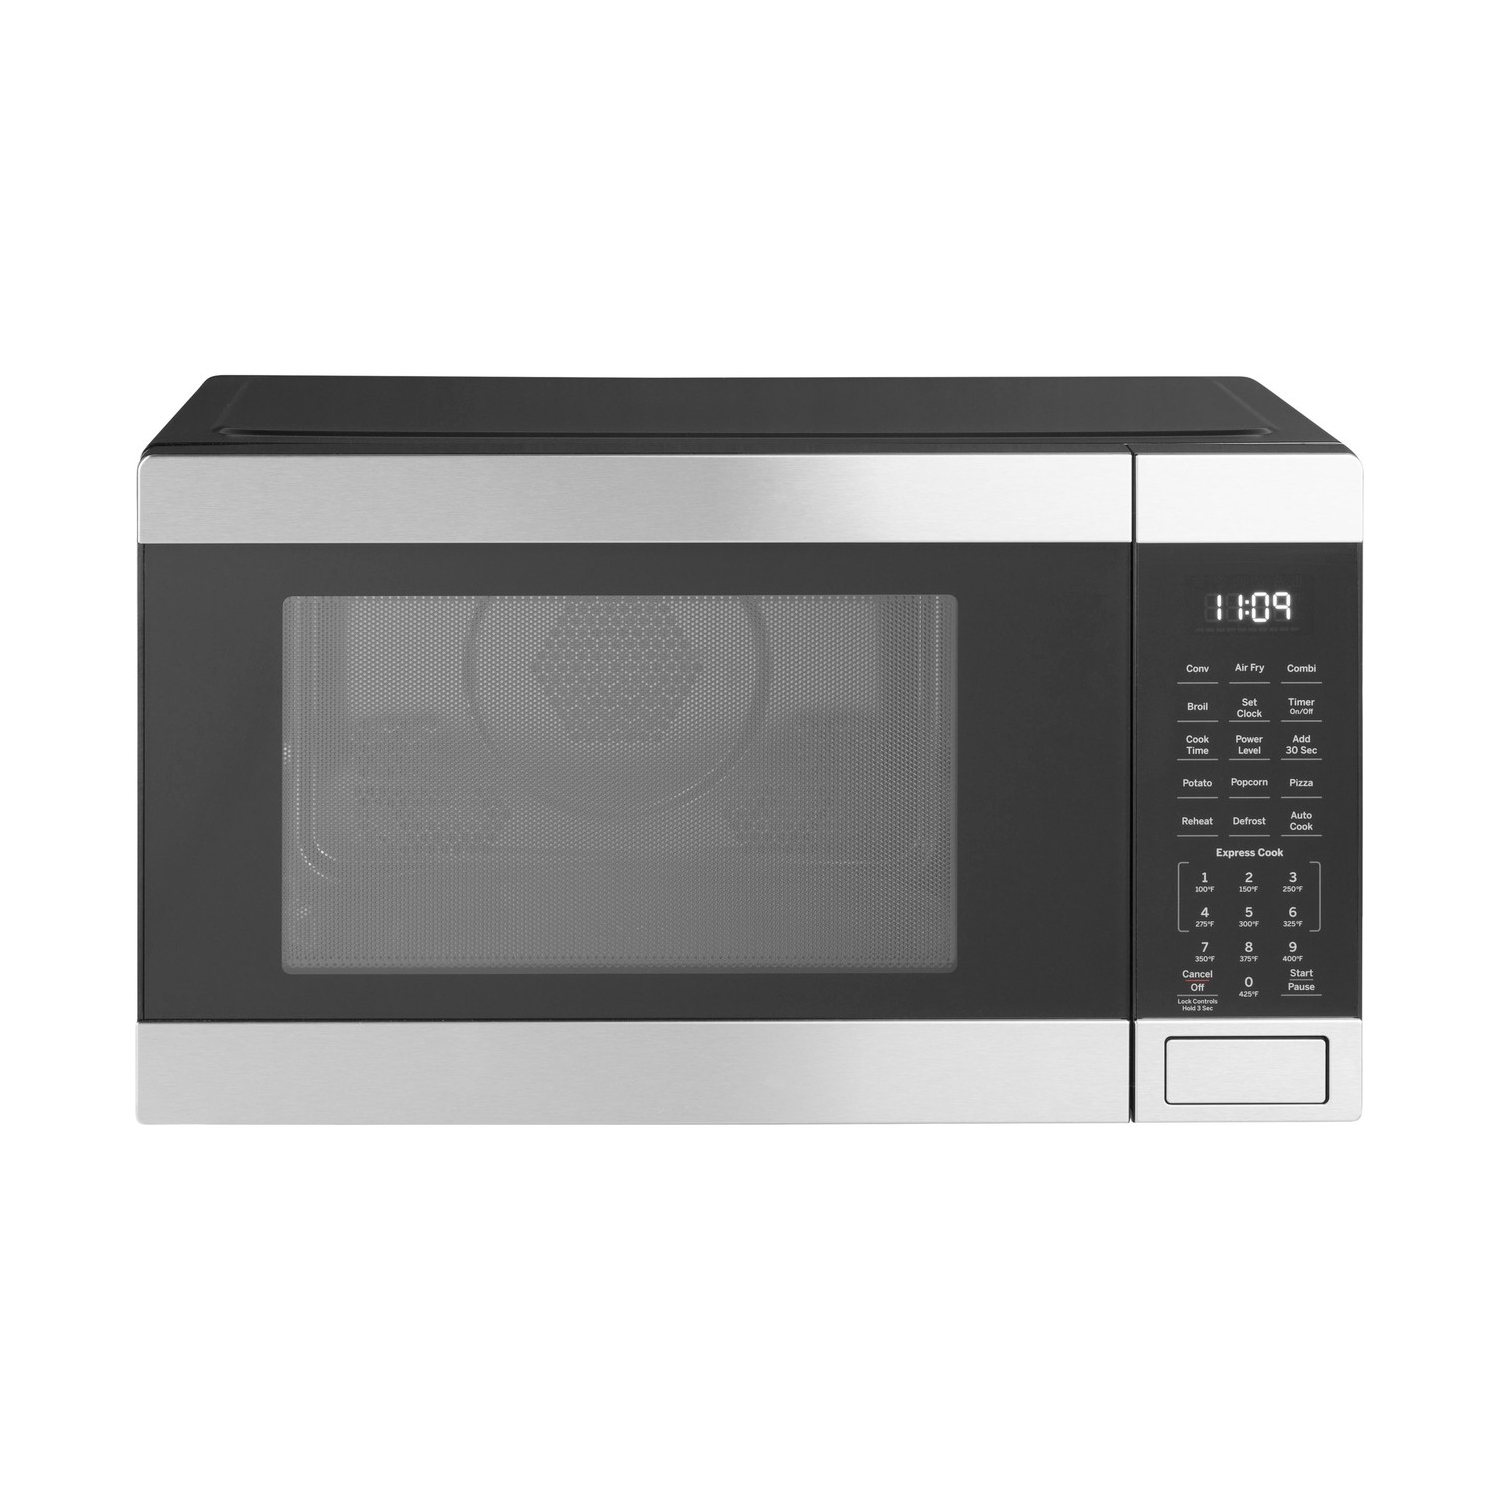 GE 3-in-1 Countertop Microwave Oven, Complete With Air Fryer, Broiler & Convection Mode, 1.0 cu. ft.1,050 W, Essentials for the Countertop or Dorm, Stainless Steel (JES1109RRSS)